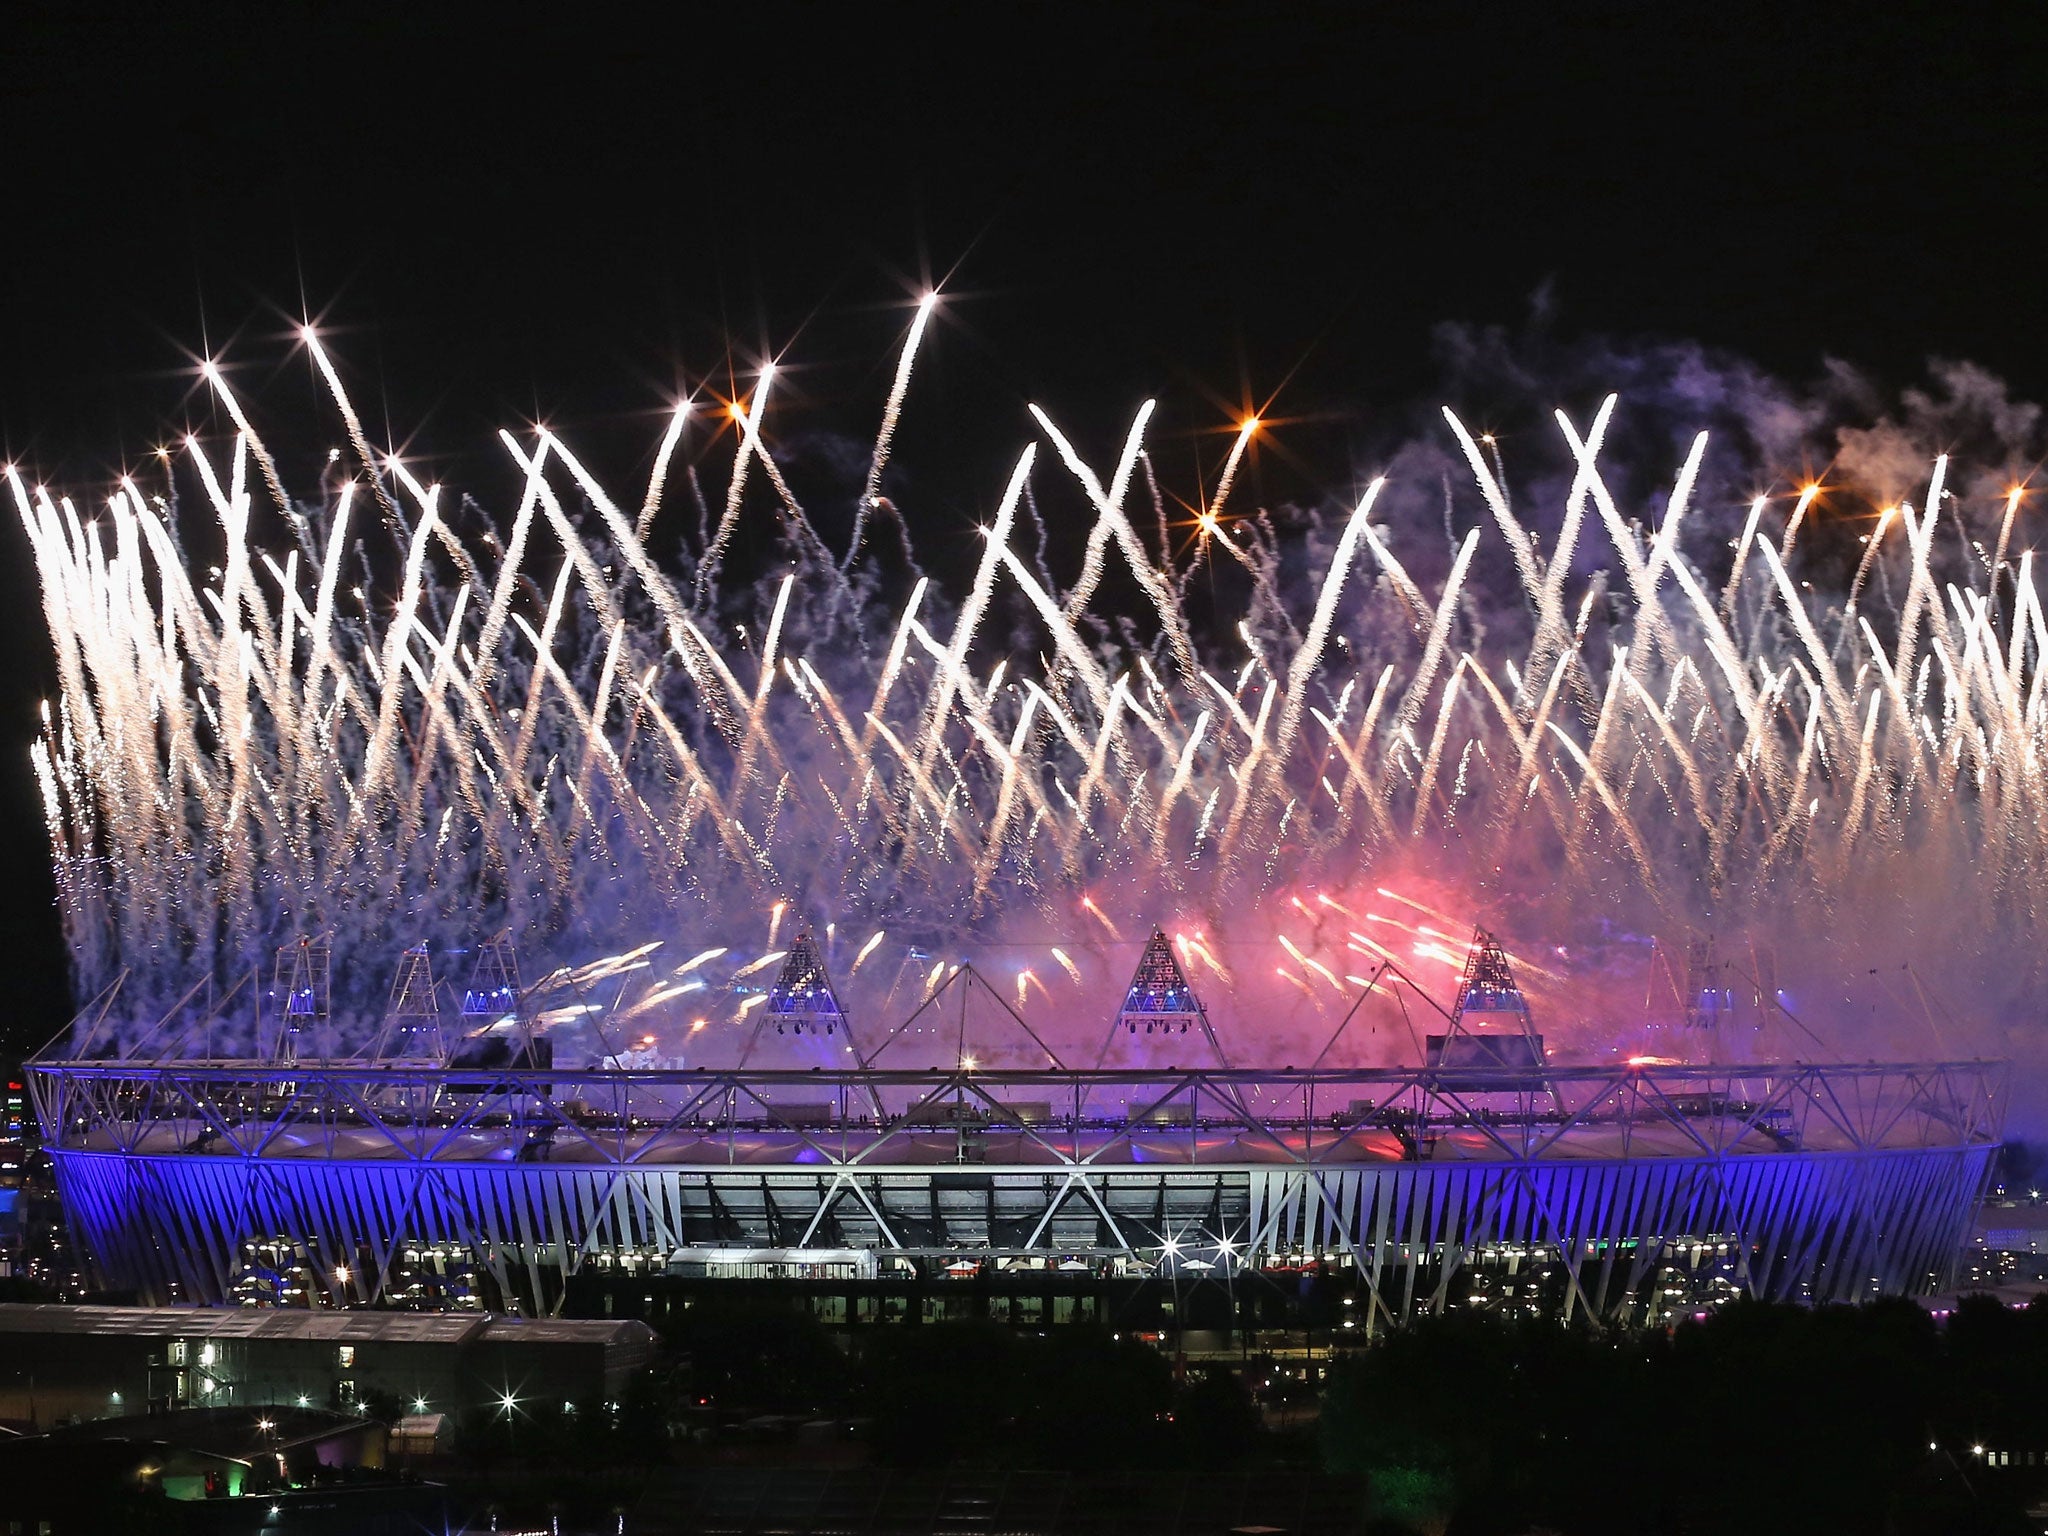 Fireworks draw to an end the opening ceremony of the 2012 London Olympic Games on July 28, 2012 in London, England.